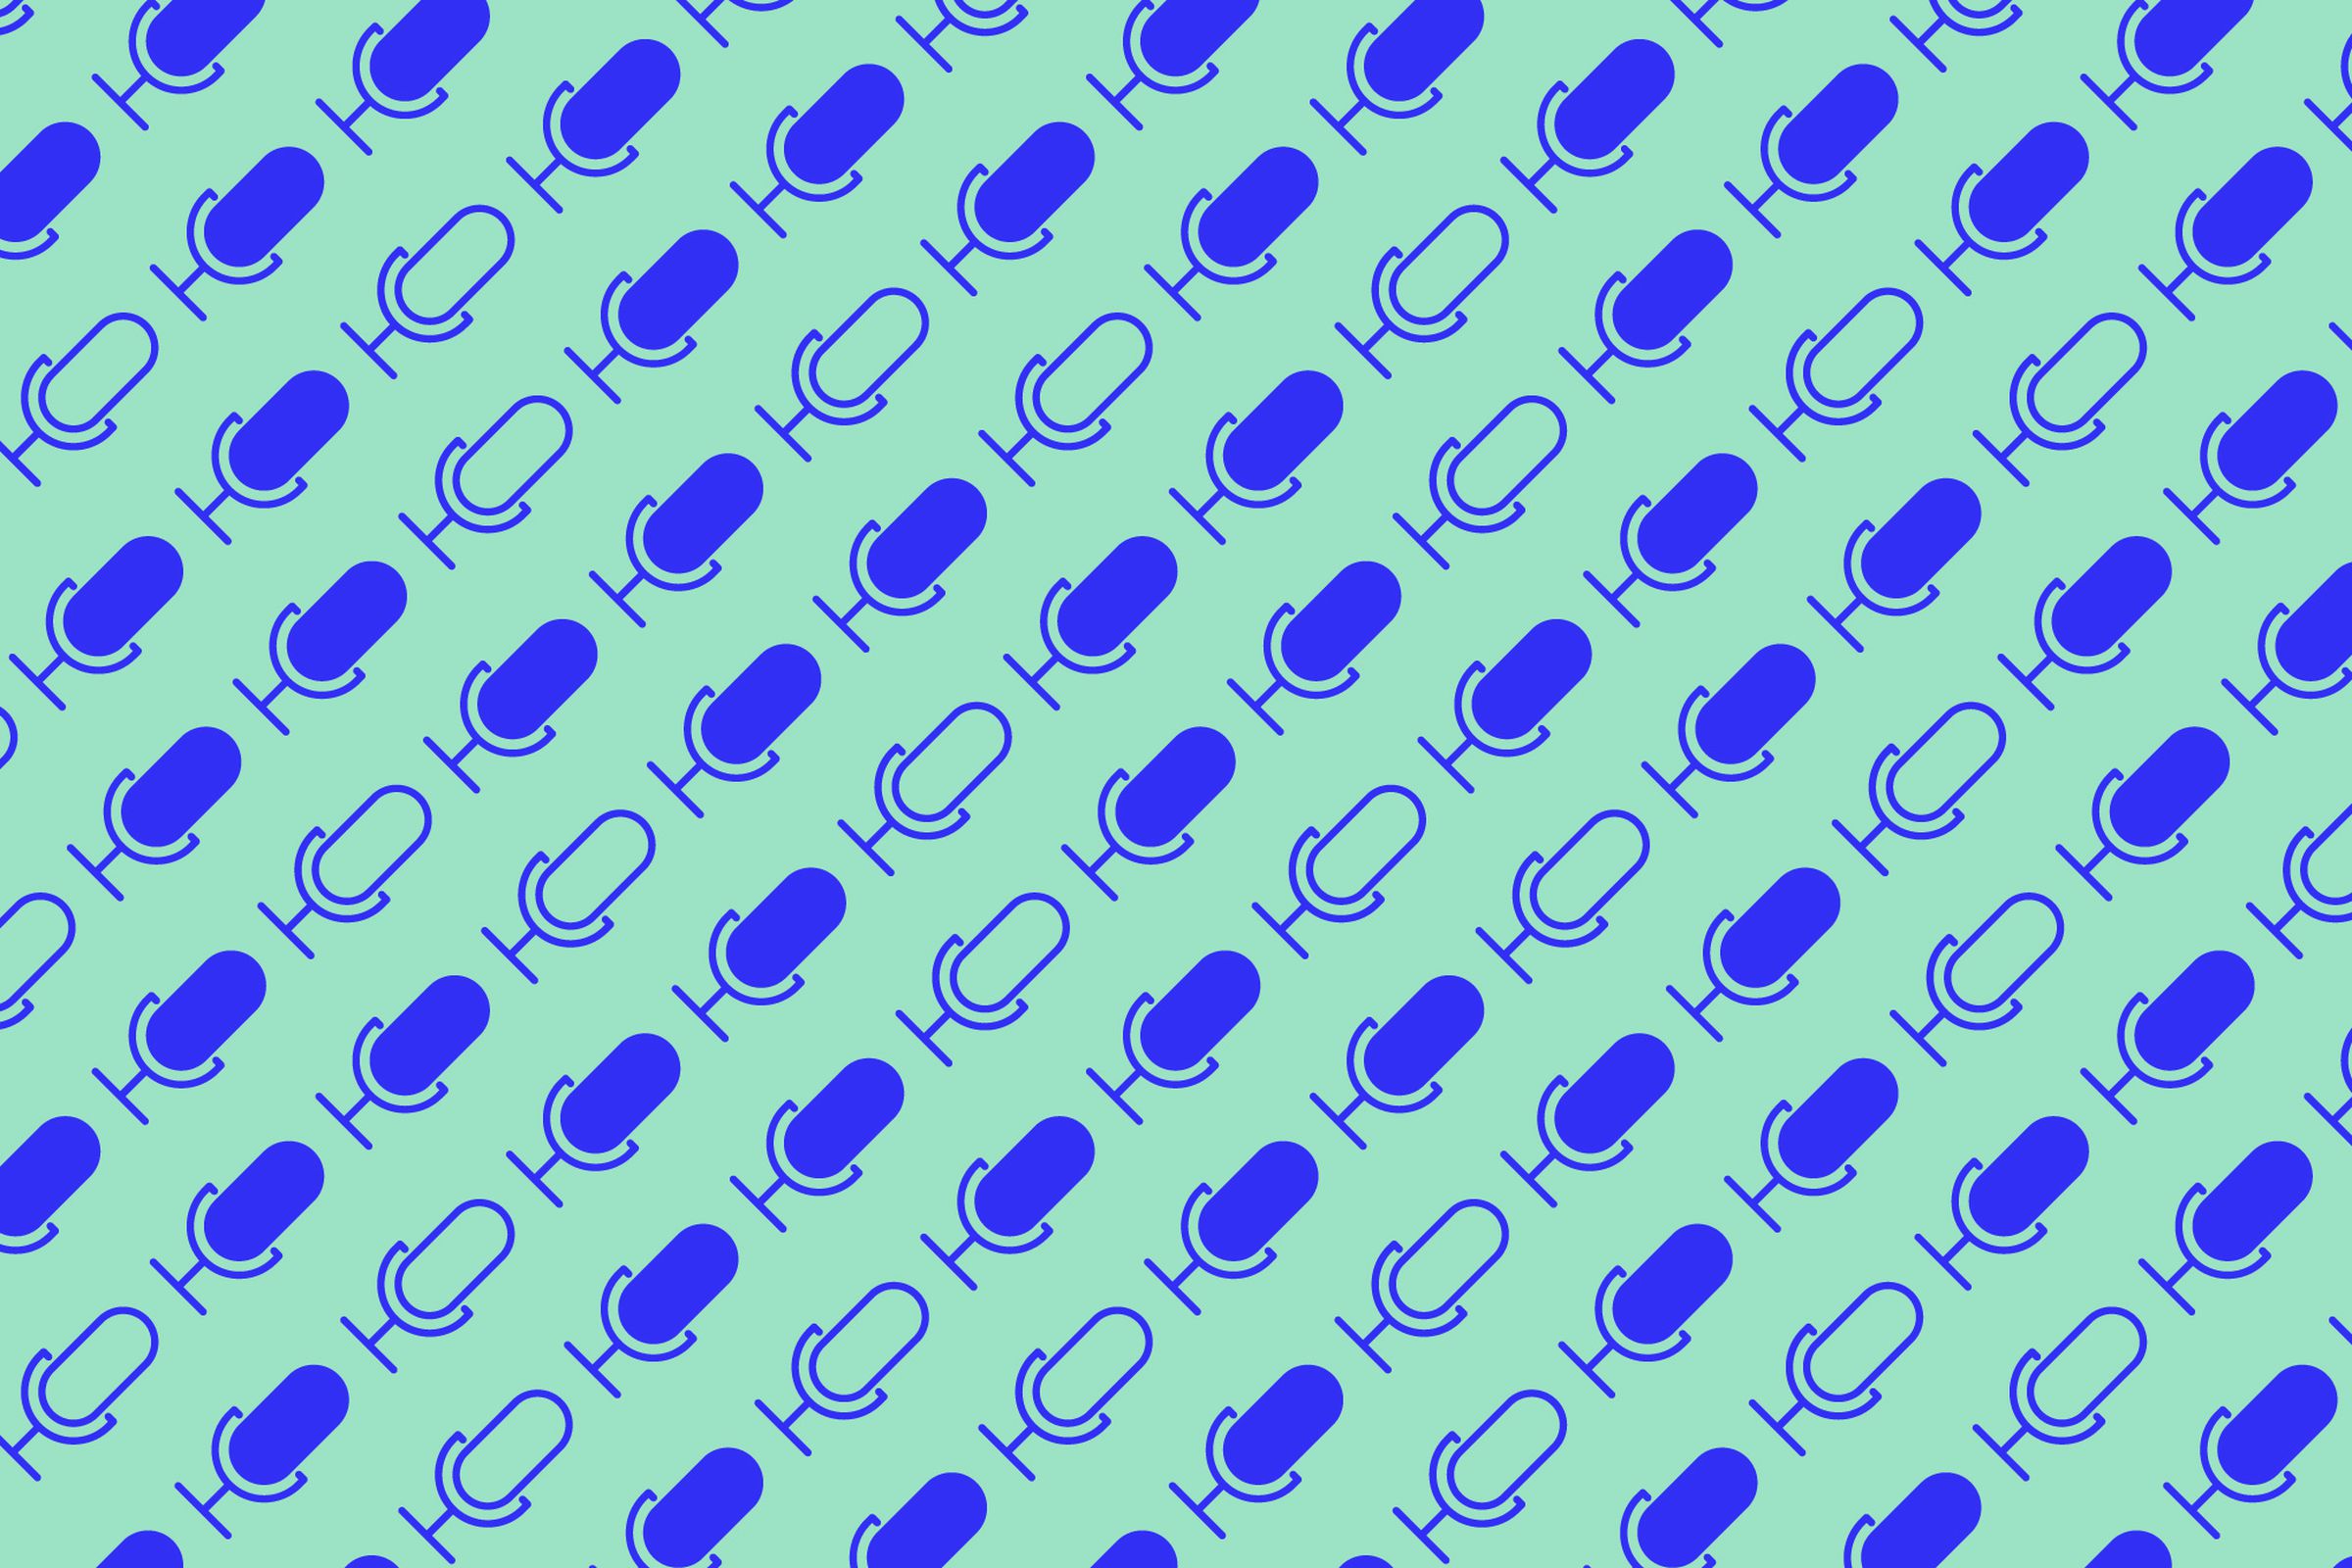 Illustration of a series of blue microphones on a teal background.